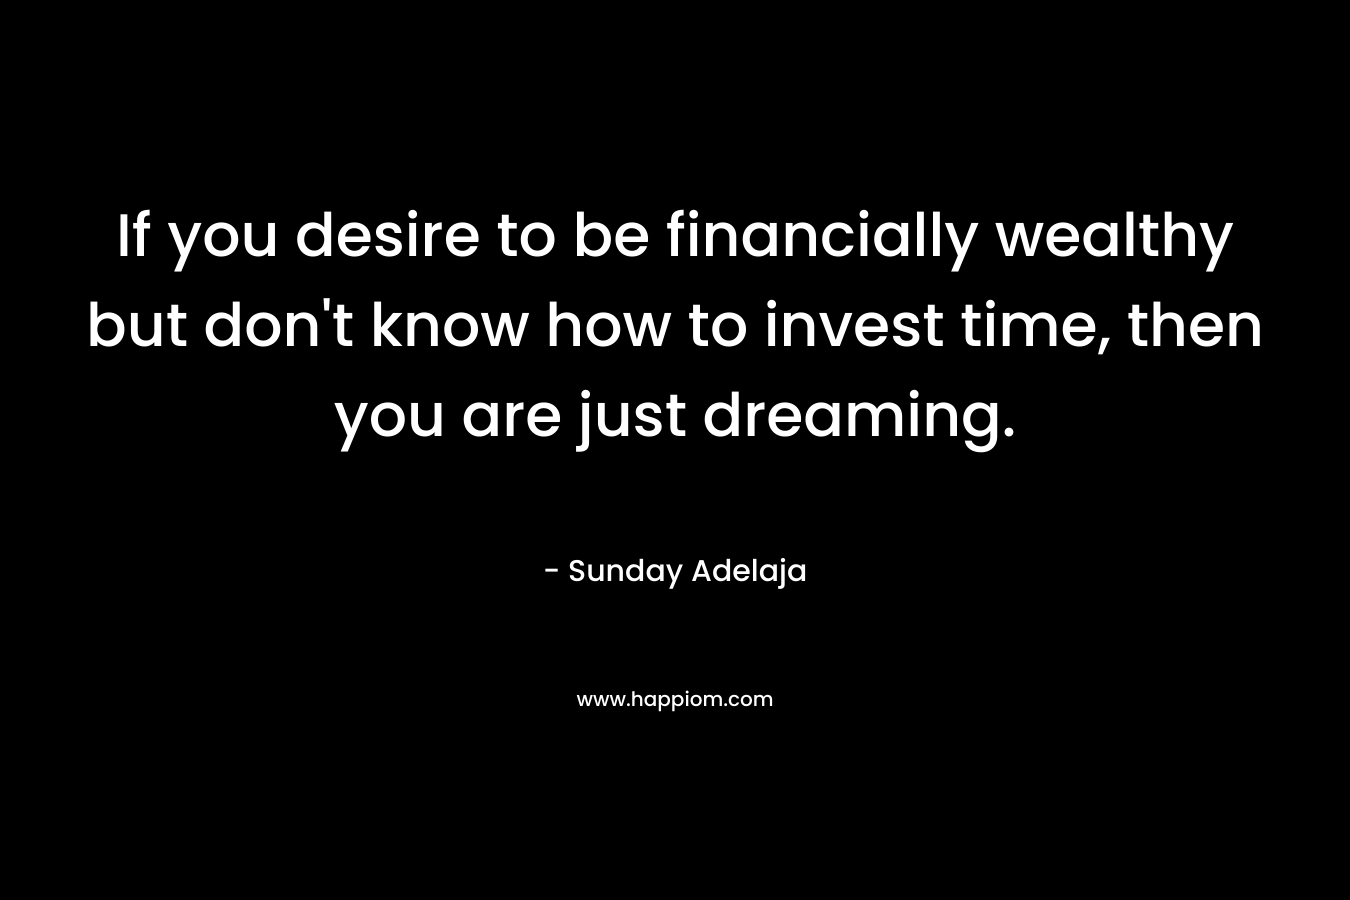 If you desire to be financially wealthy but don't know how to invest time, then you are just dreaming.